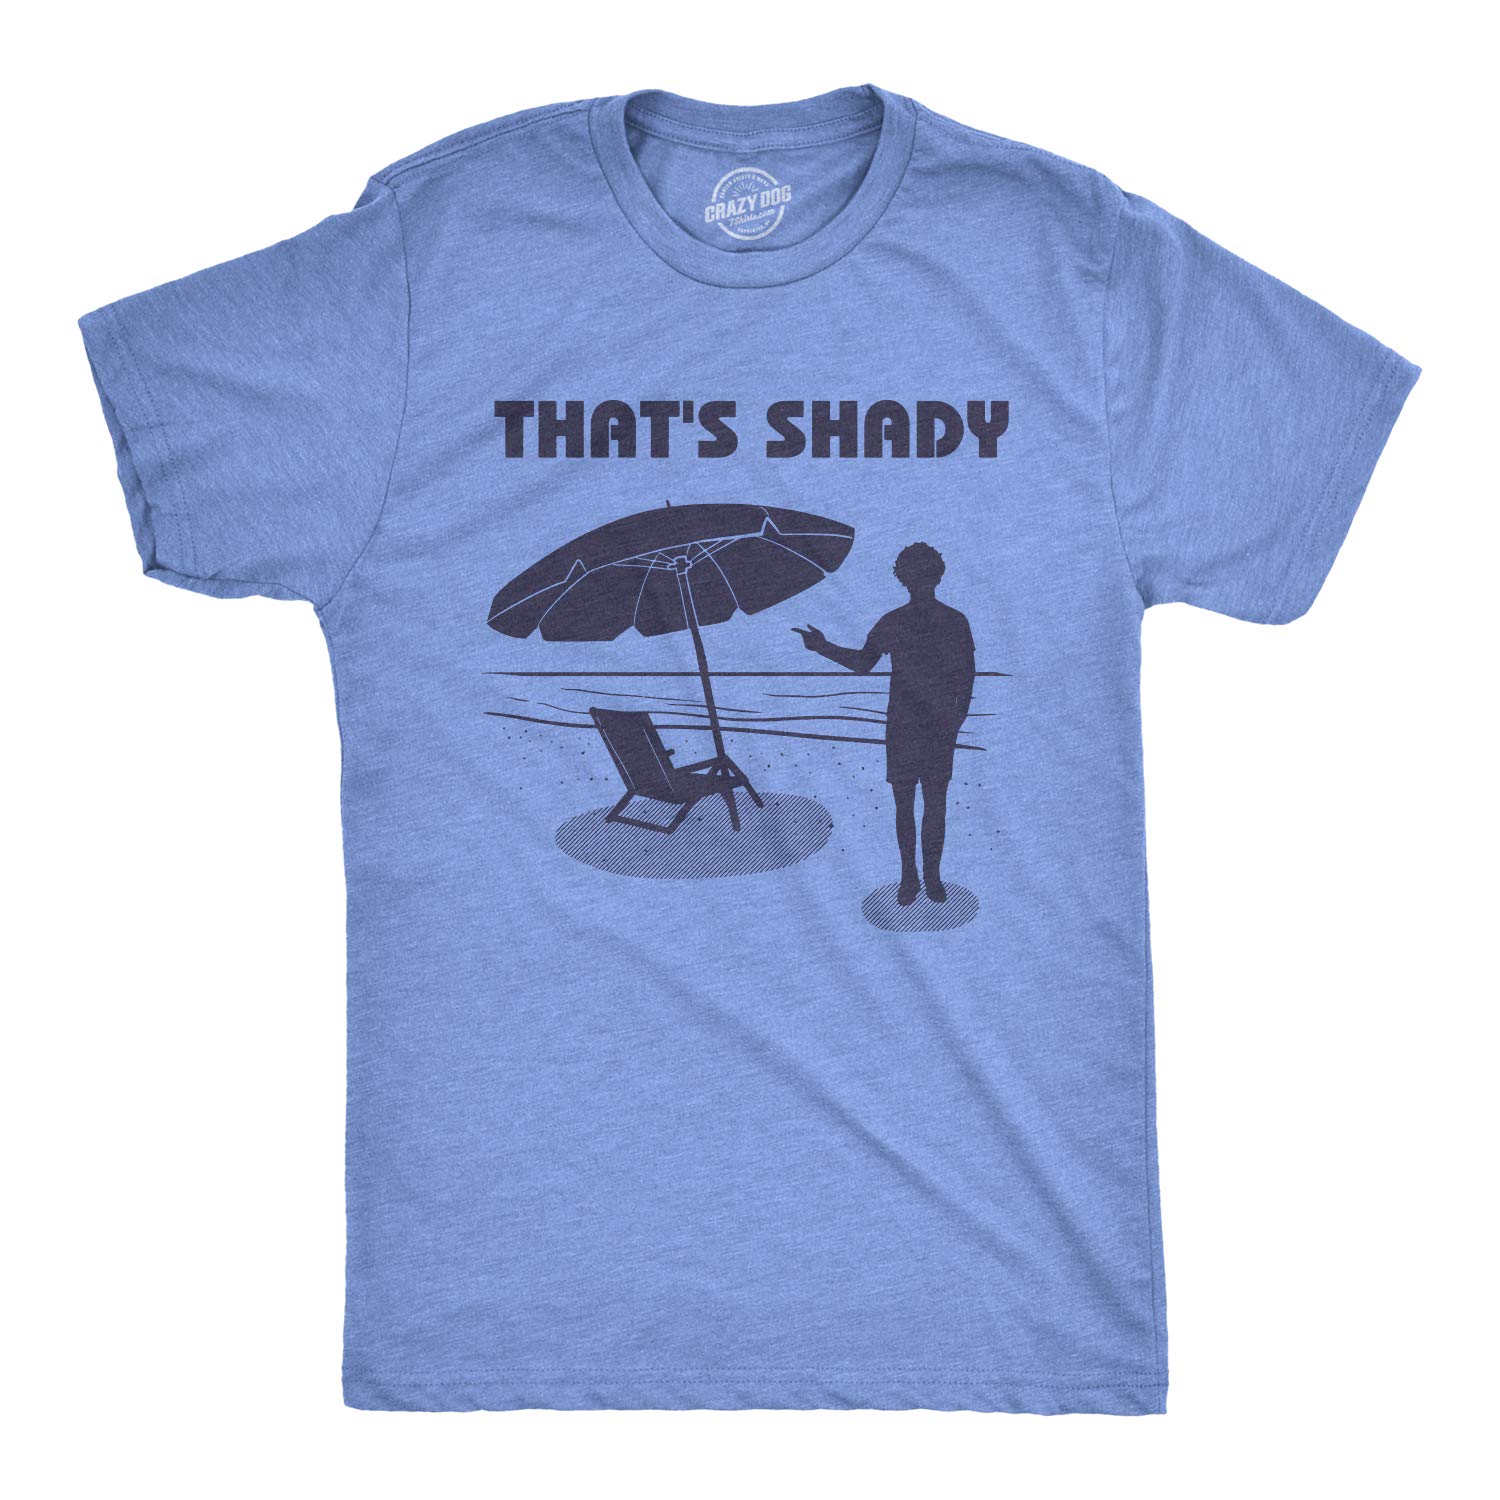 Mens Thats Shady T Shirt Funny Beach Vacation Sarcastic Hilarious Graphic Tee